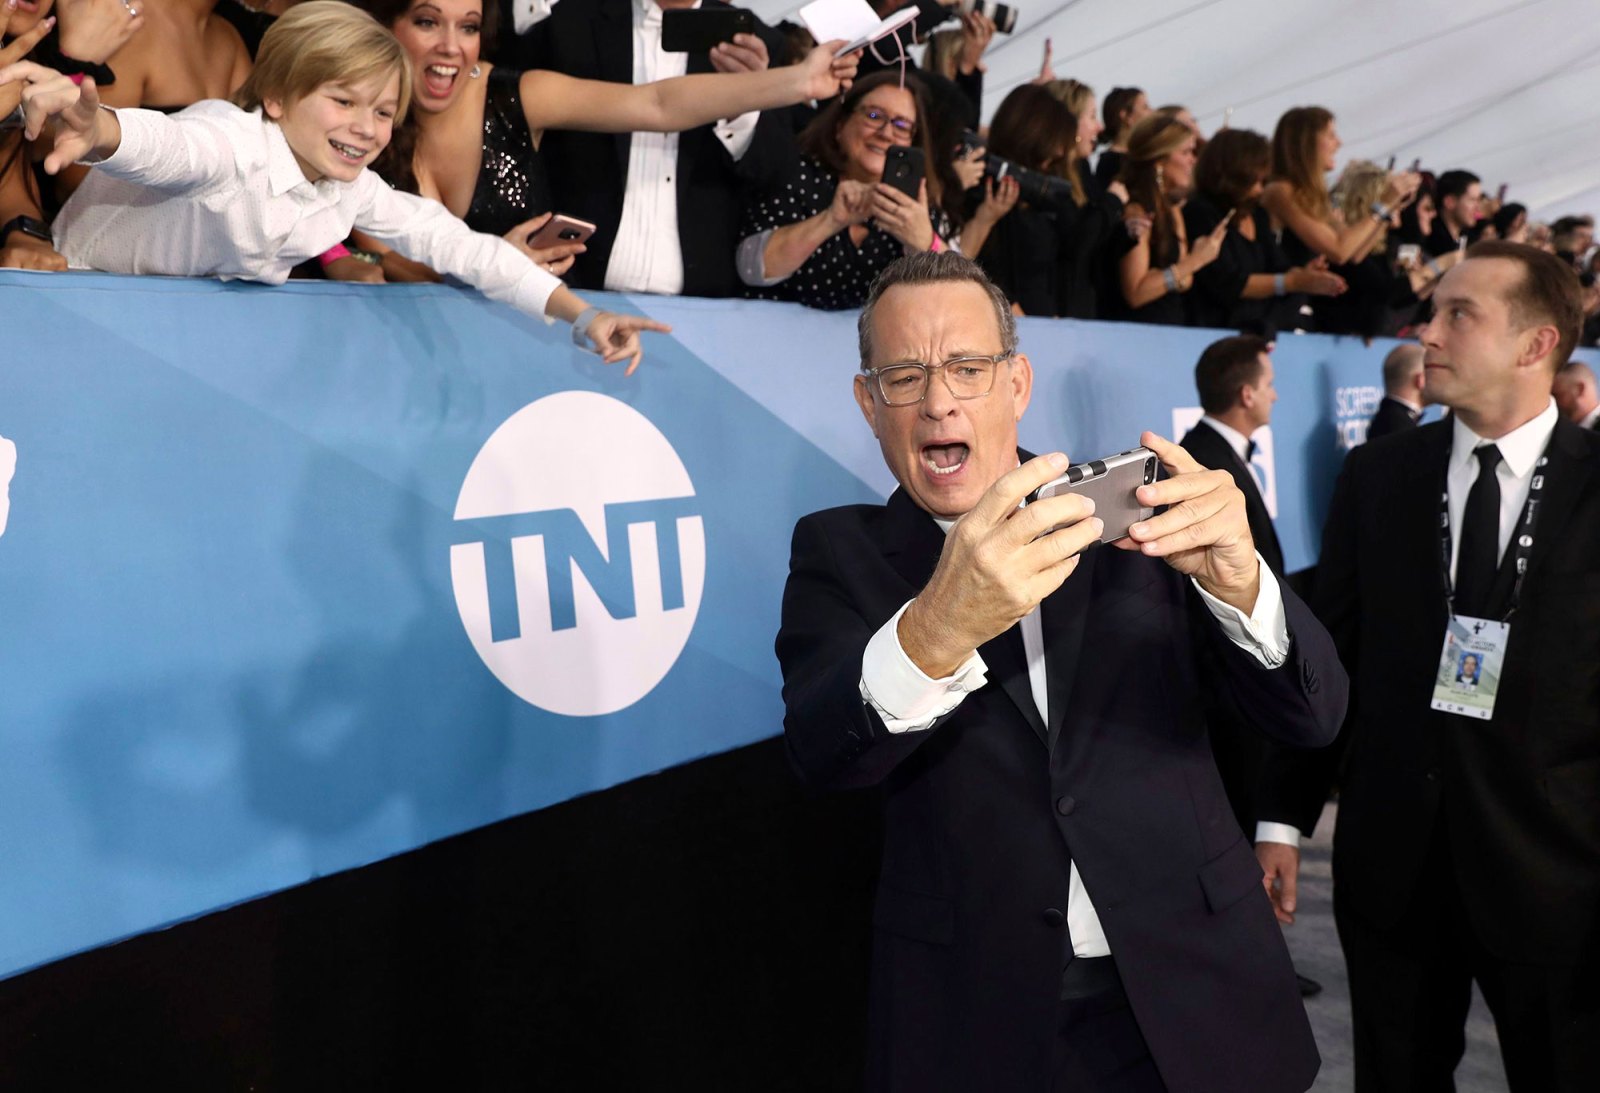 Tom Hanks What You Didn't See On TV SAG Awards 2020